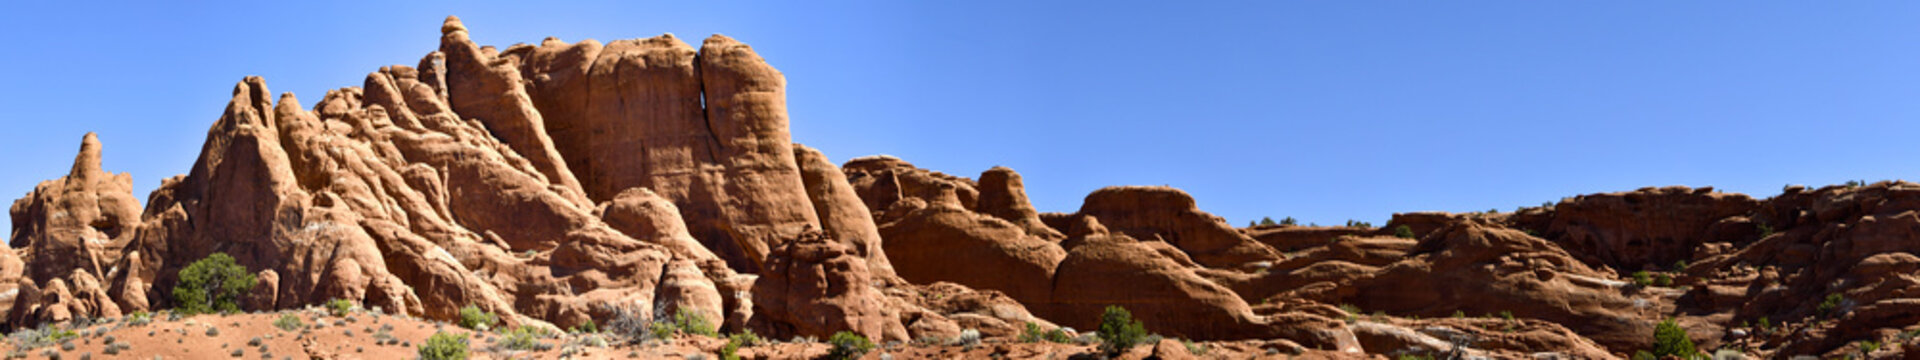 Web banner of Arches National Park, Utah